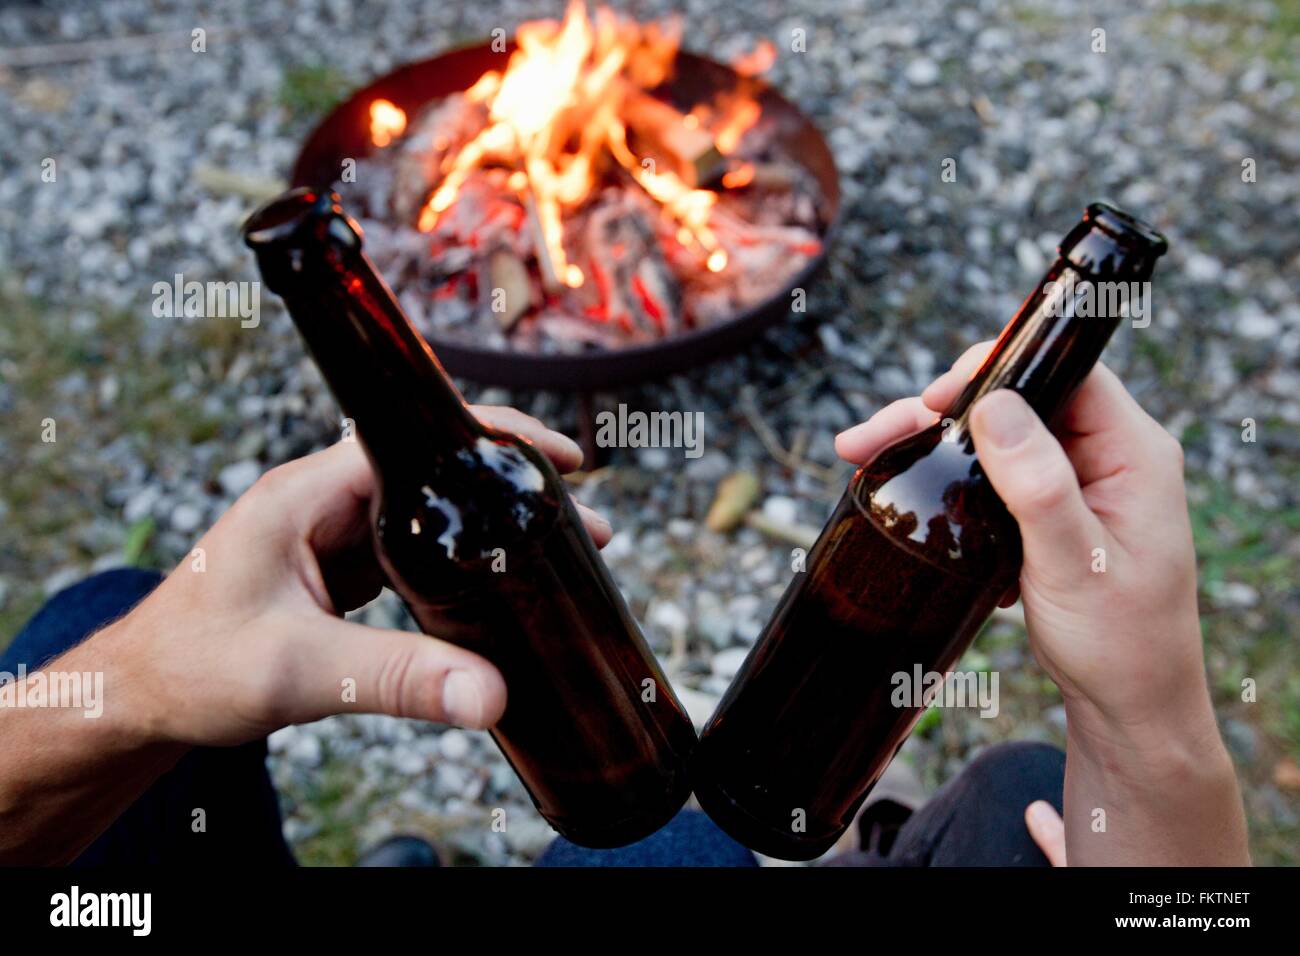 Hands holding beer bottles with campfire Stock Photo